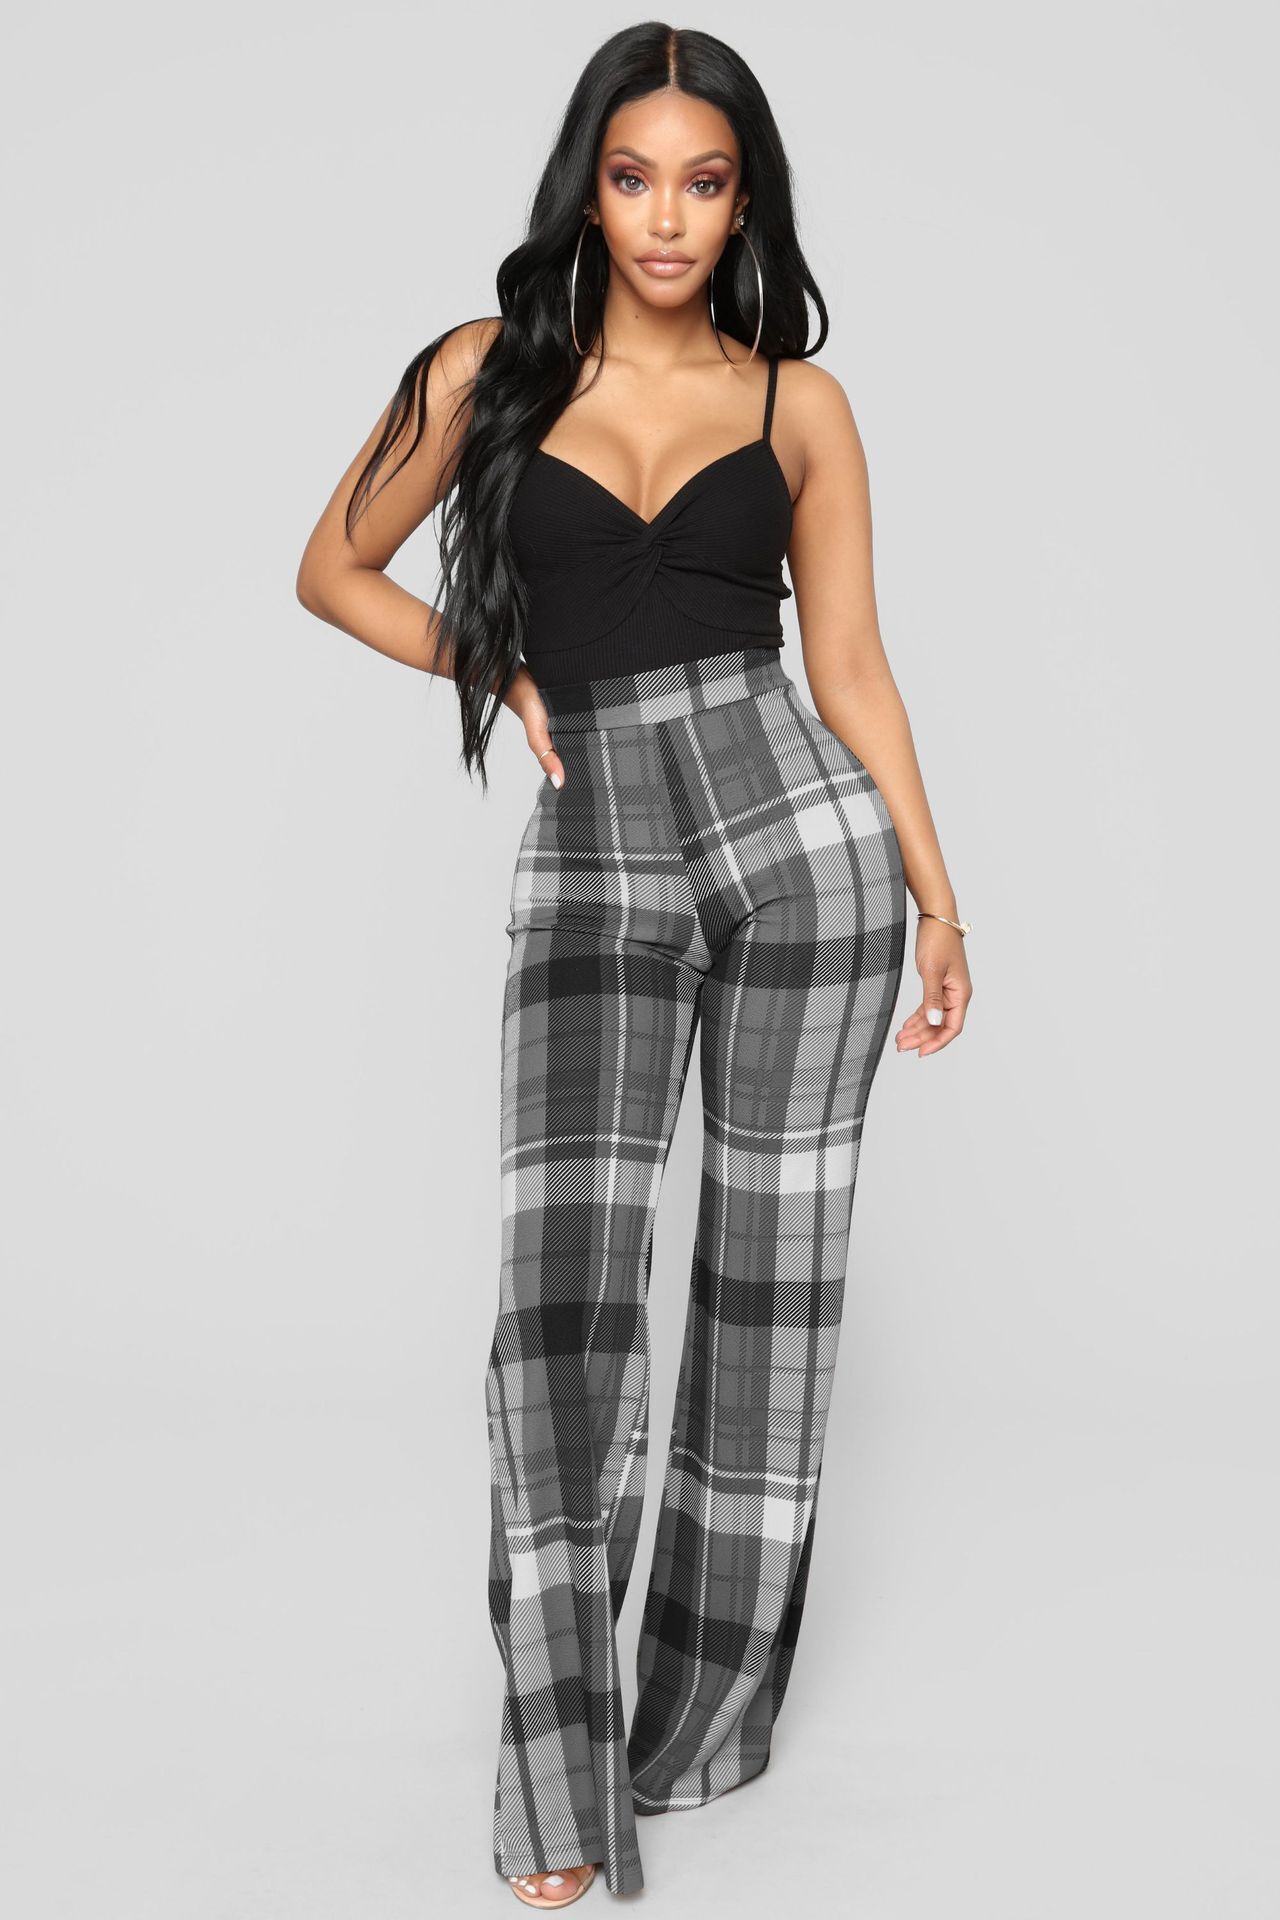 Unlimon's New Fashion Three Color Checkered Printed Wide Leg Pants Women's Casual Pants D01511